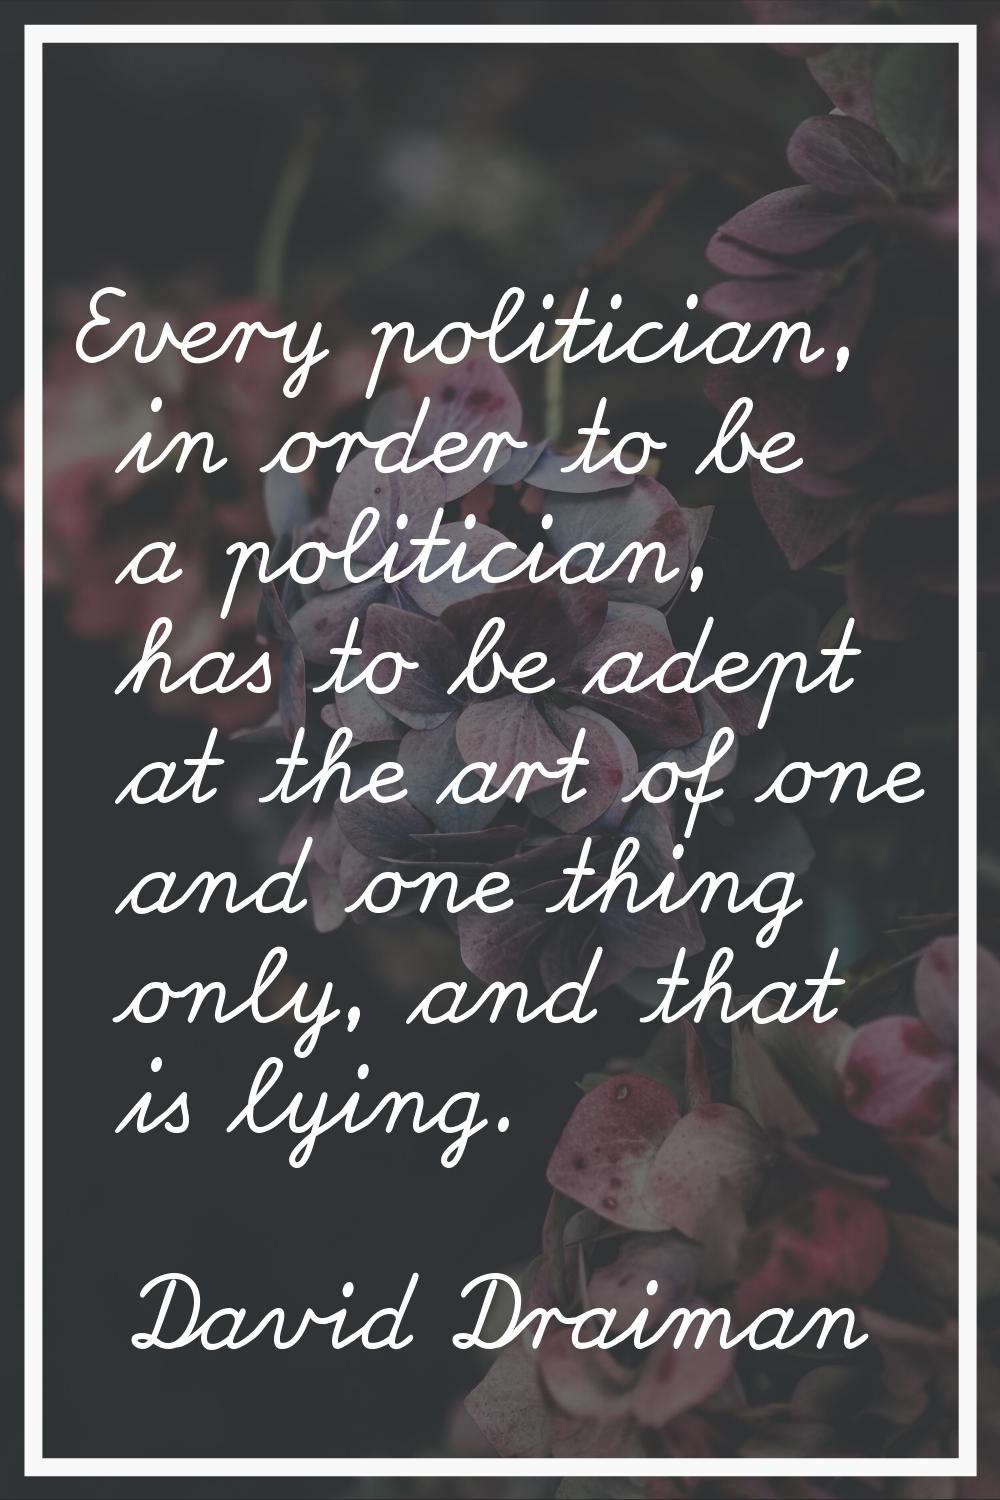 Every politician, in order to be a politician, has to be adept at the art of one and one thing only